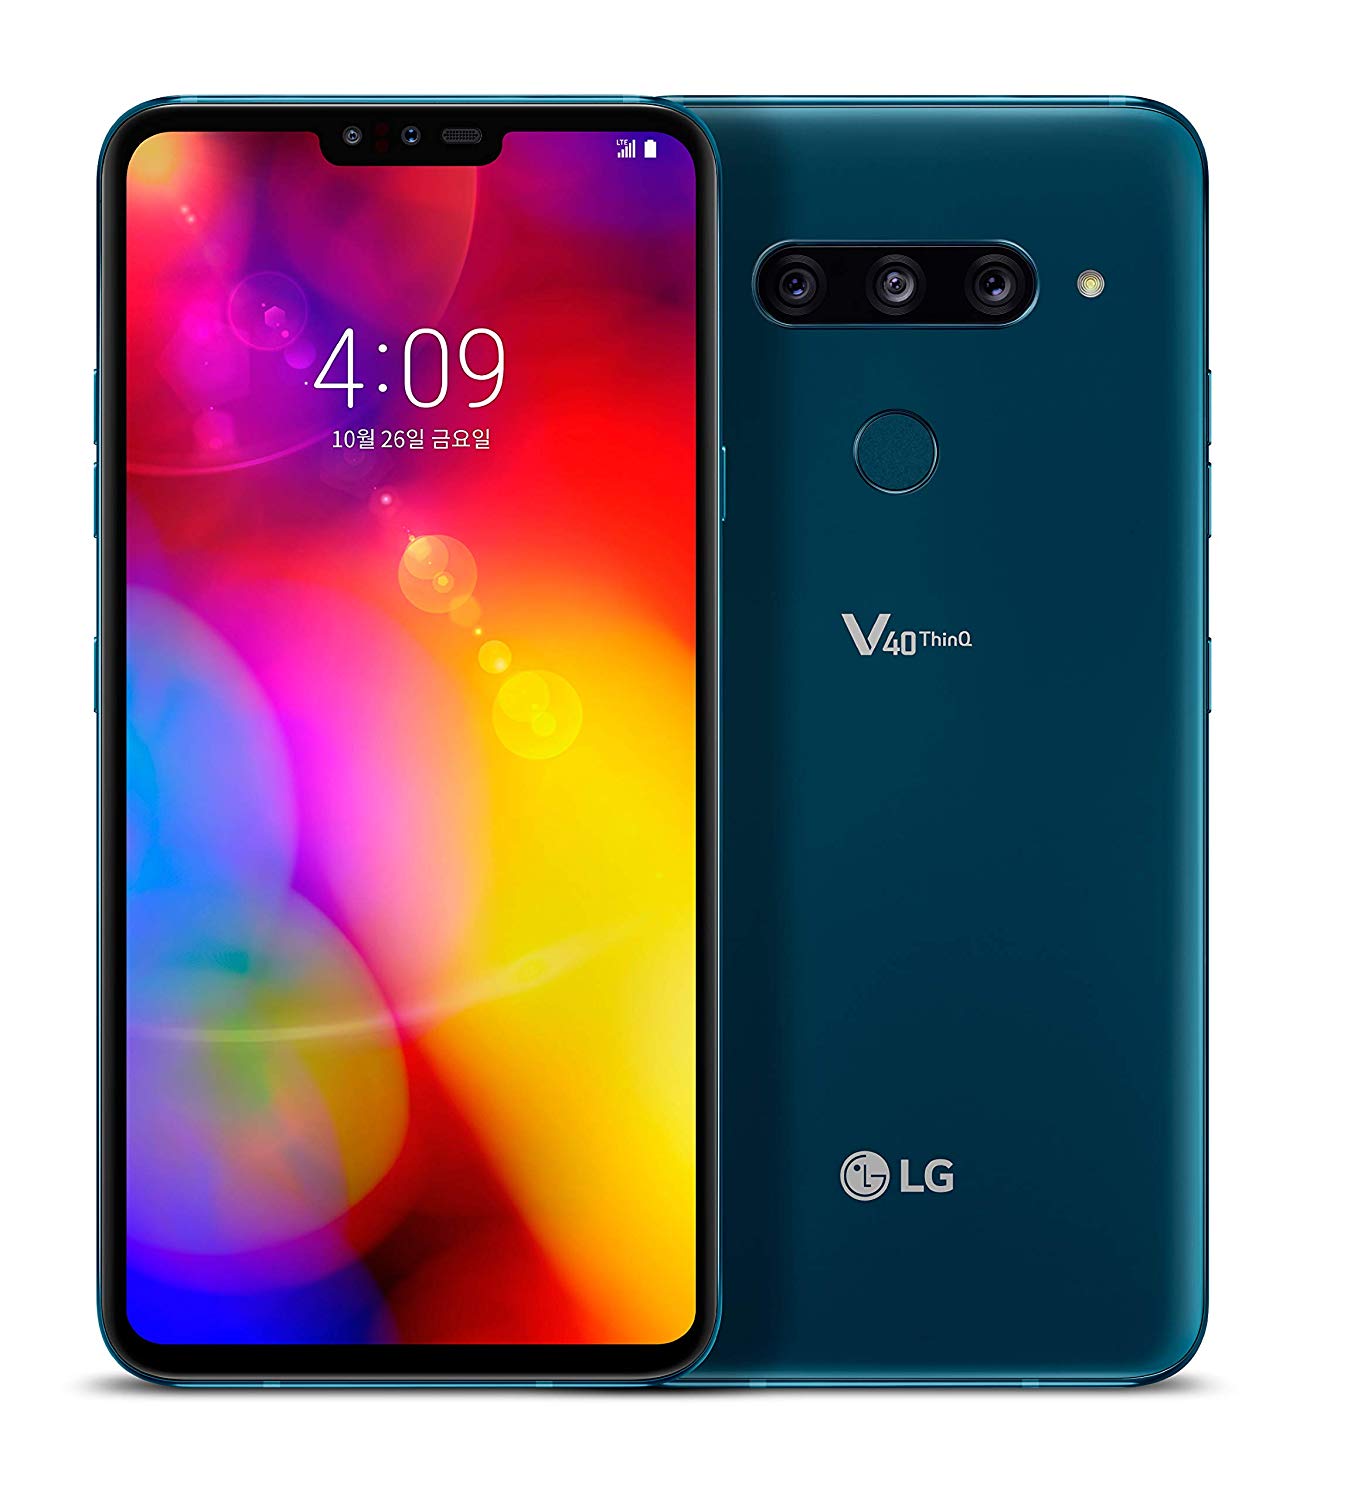 LG V40 ThinQ goes to sale in India from January 24 at Rs 49,990/-